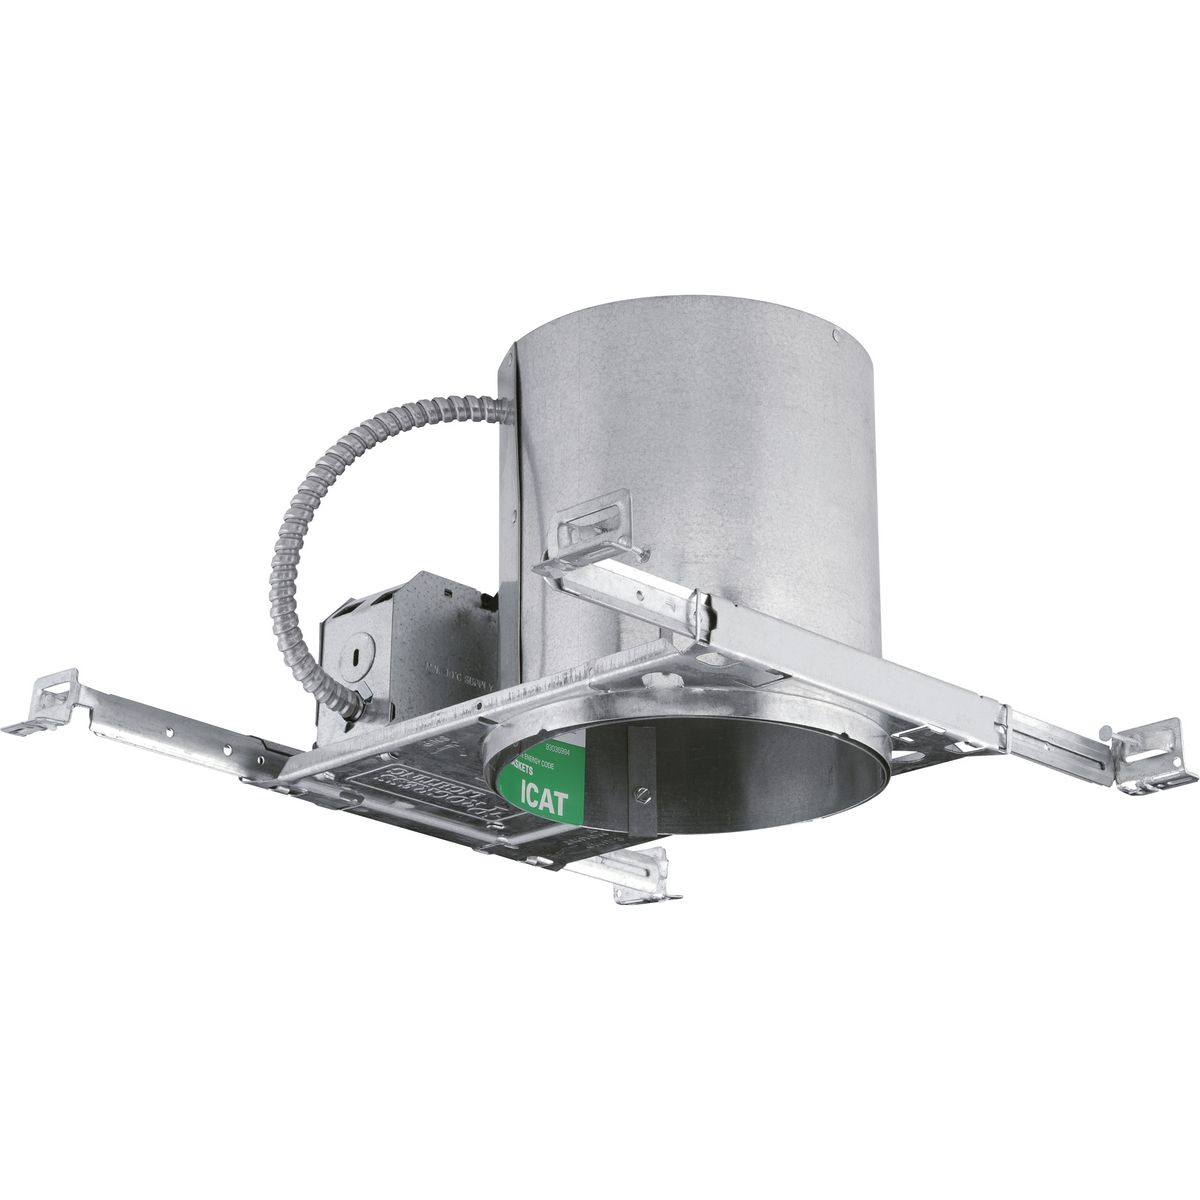 Quick connect unit can be installed in ceilings from 1/2 in to 1-1/2 in thick. Heavy duty mounting frame, full reflector design, UL & CUL listed for damp locations.